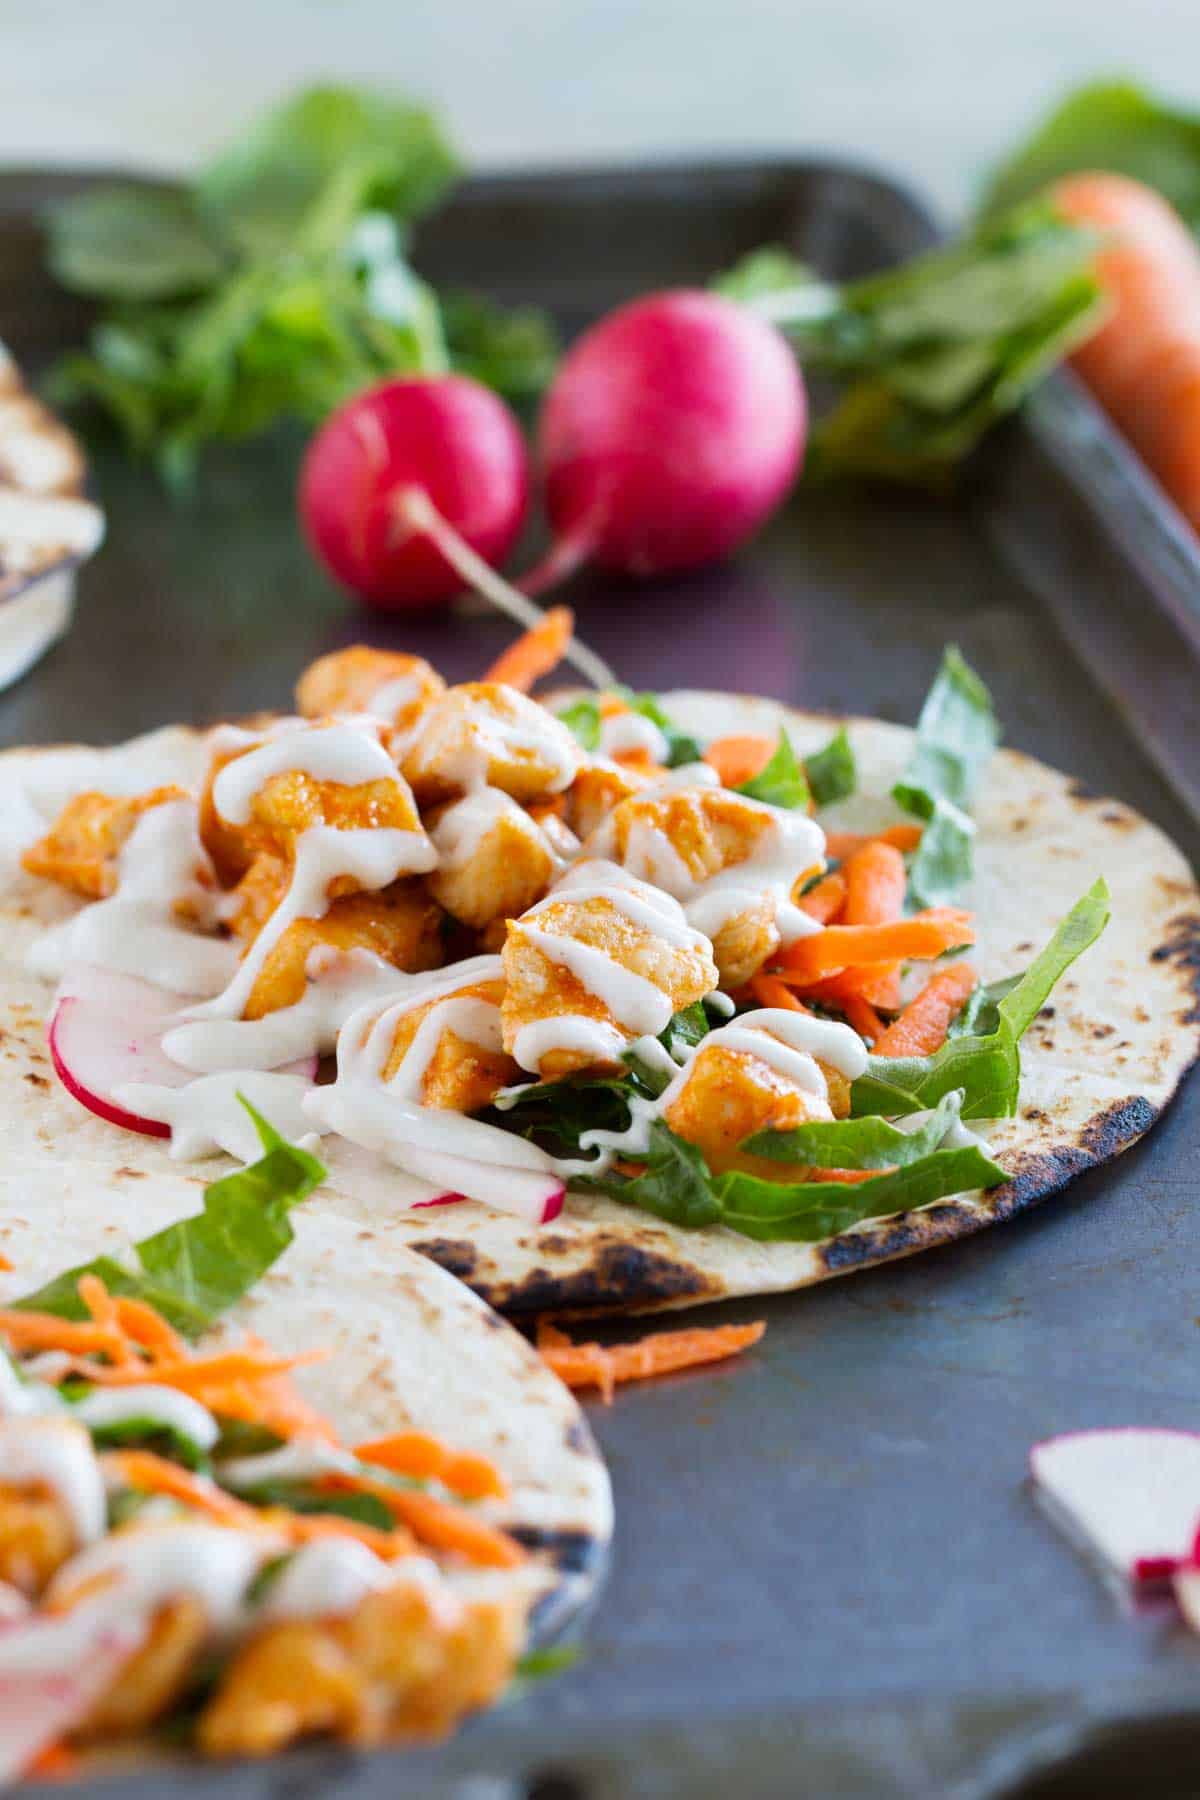 Tortillas filled with buffalo chicken and taco toppings.